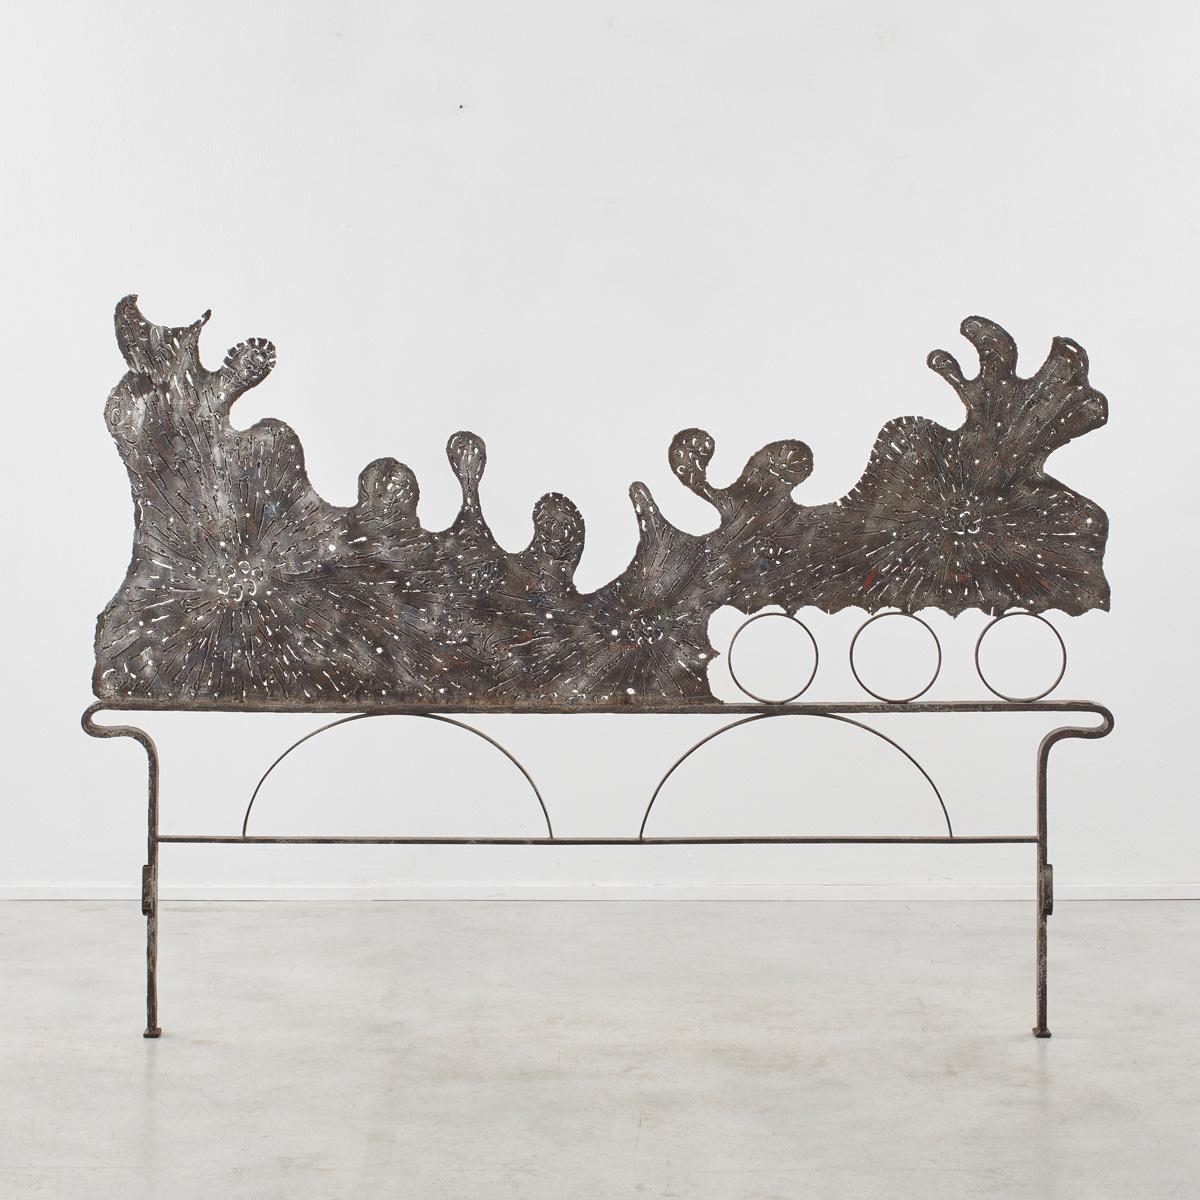 Salvino Marsura was born in Treviso in 1938 and learnt his craft in the dynamic workshop of sculptor Toni Benetton. His ironwork art and furniture relishes in the manual aesthetic of the forge, giving voice to the raw metal and the processes of its